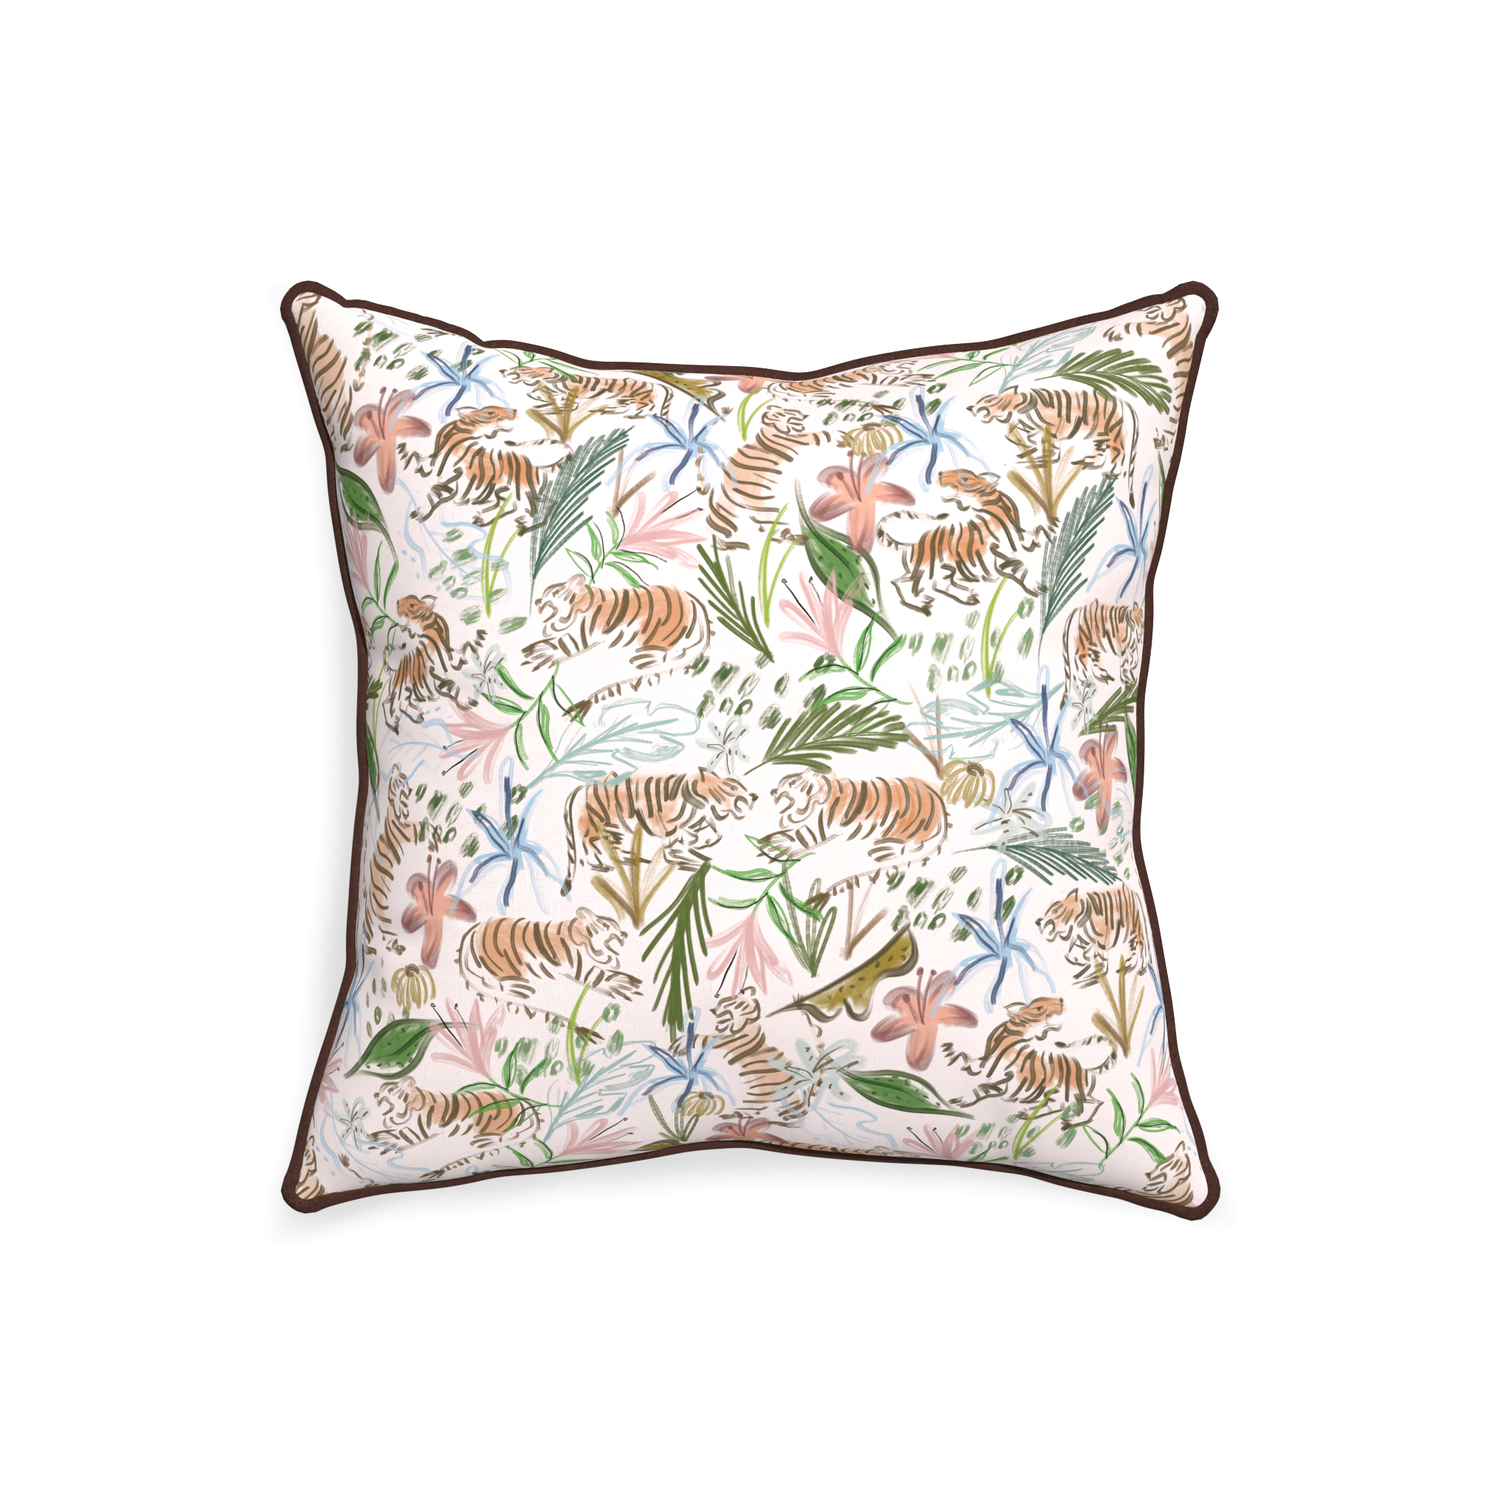 20-square frida pink custom pink chinoiserie tigerpillow with w piping on white background